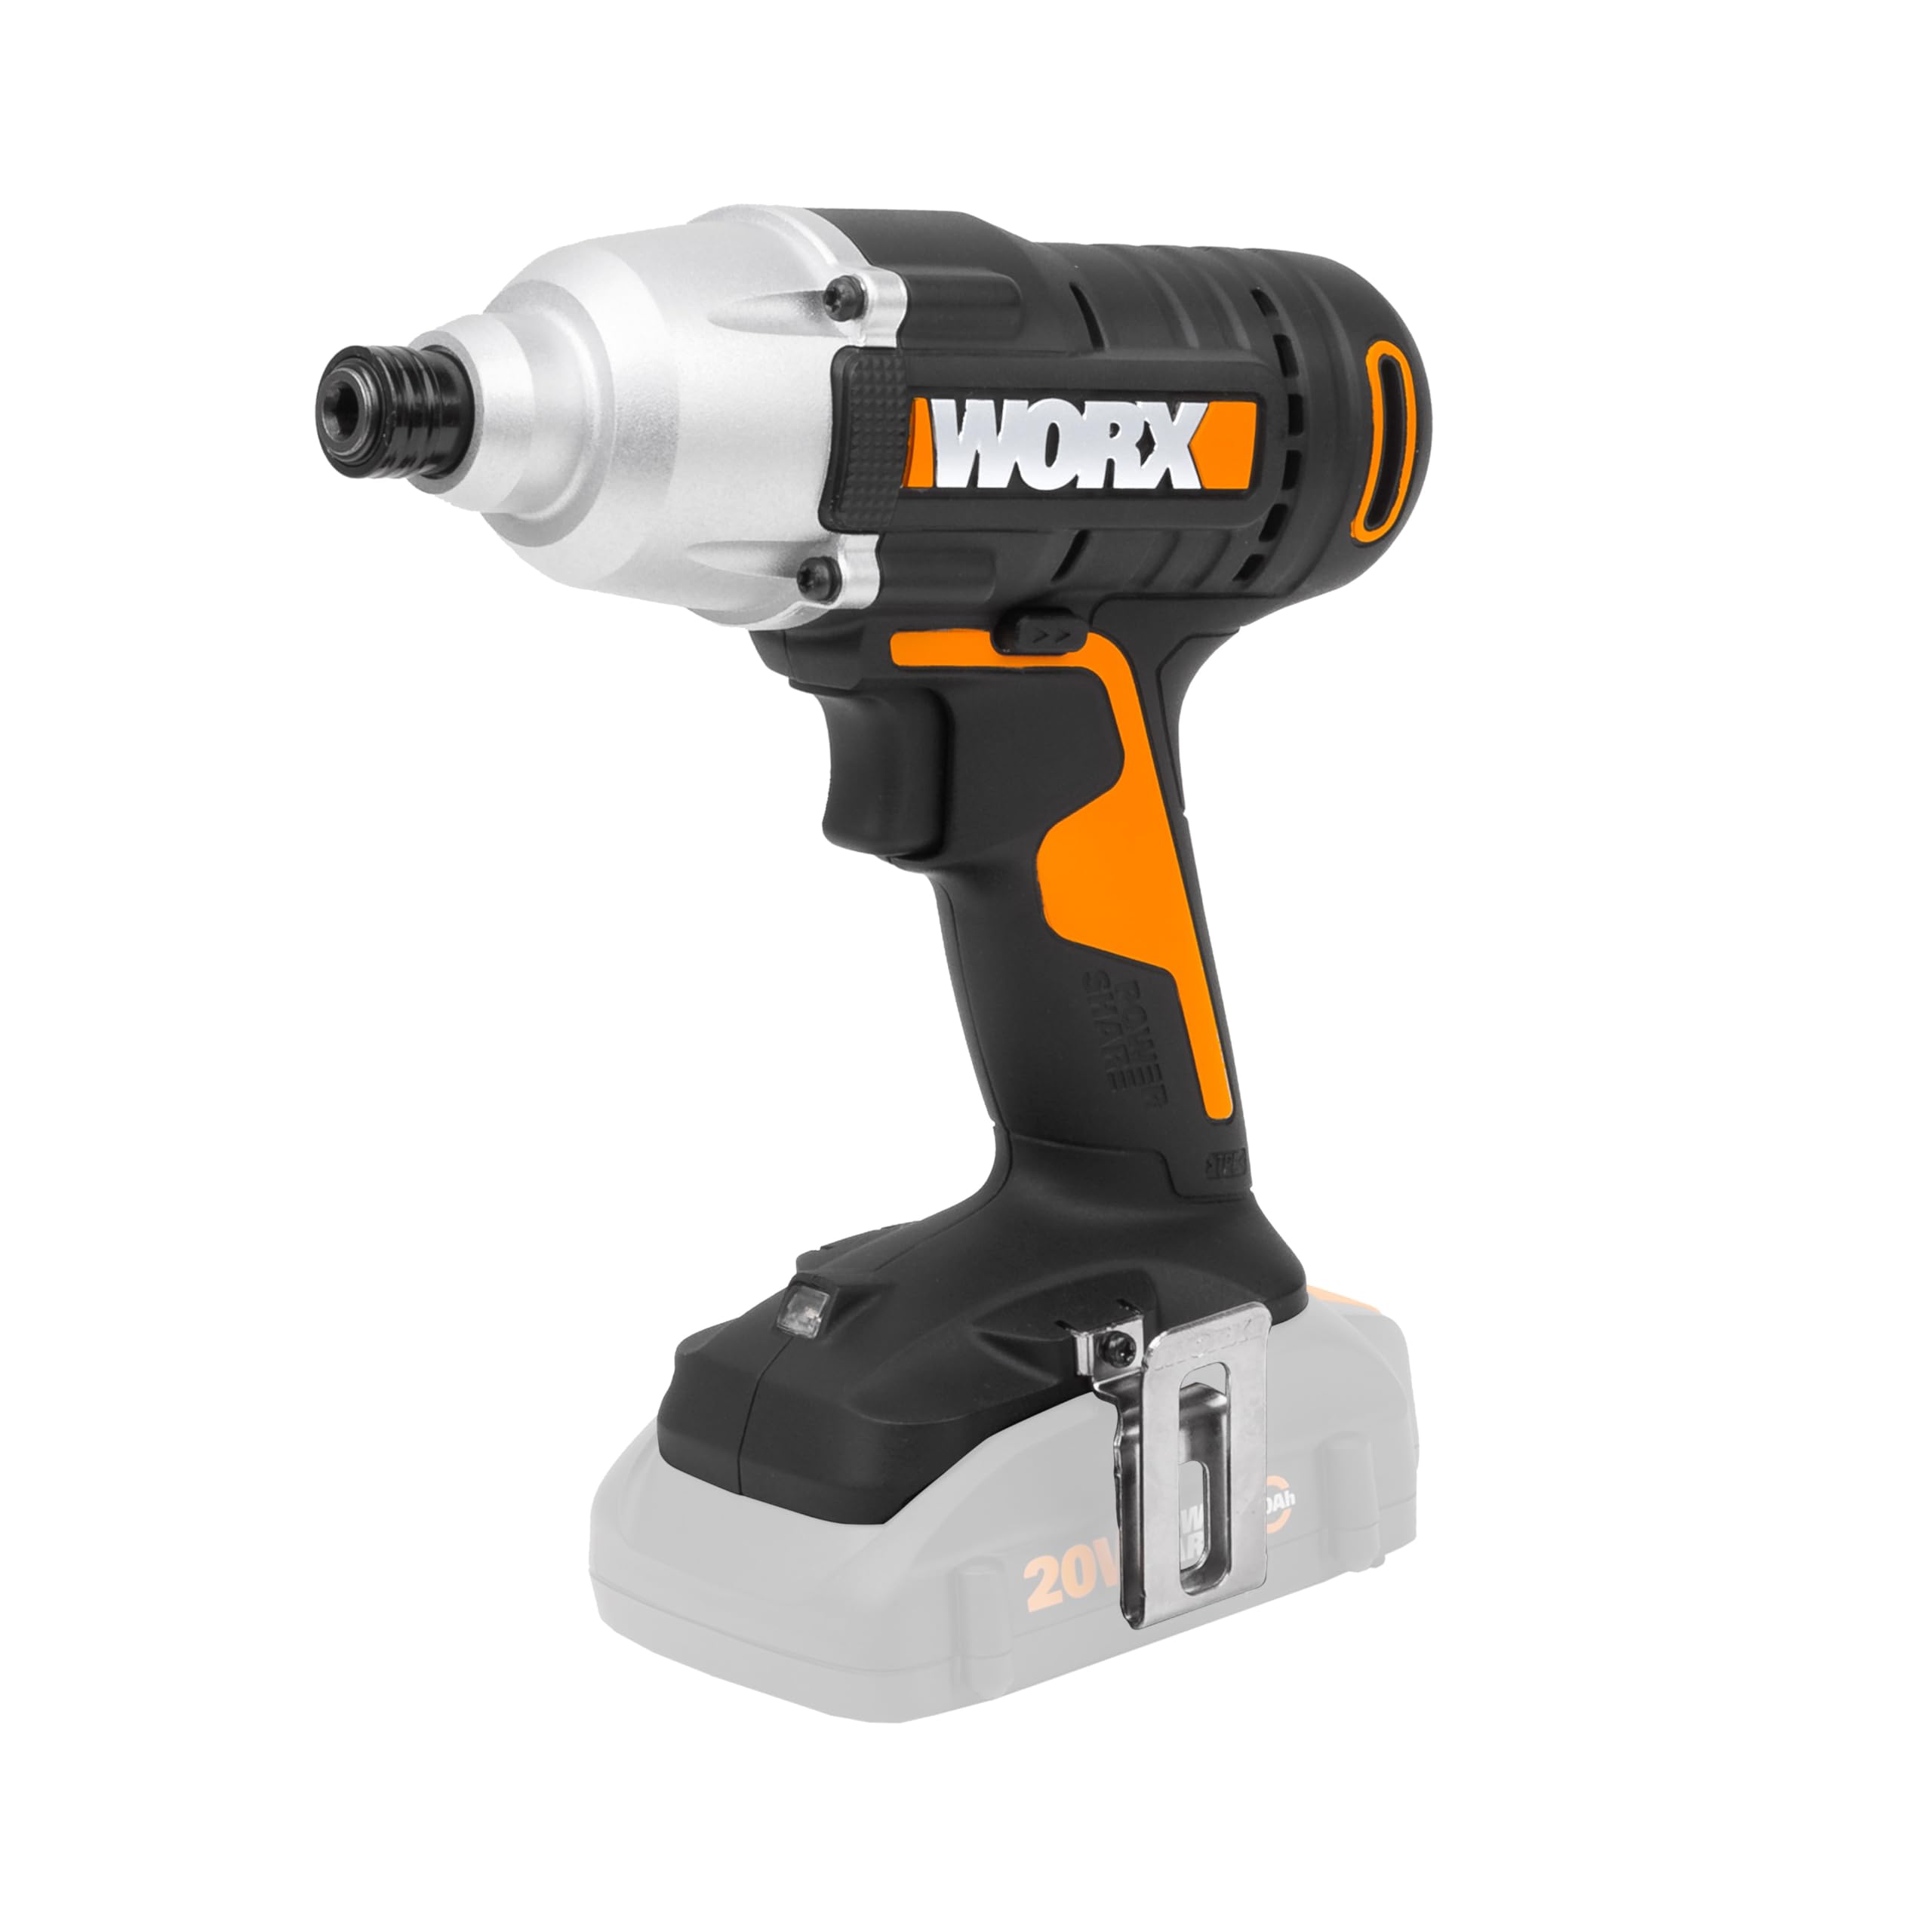 What are the Differences between a Cordless Drill And an Impact Driver?